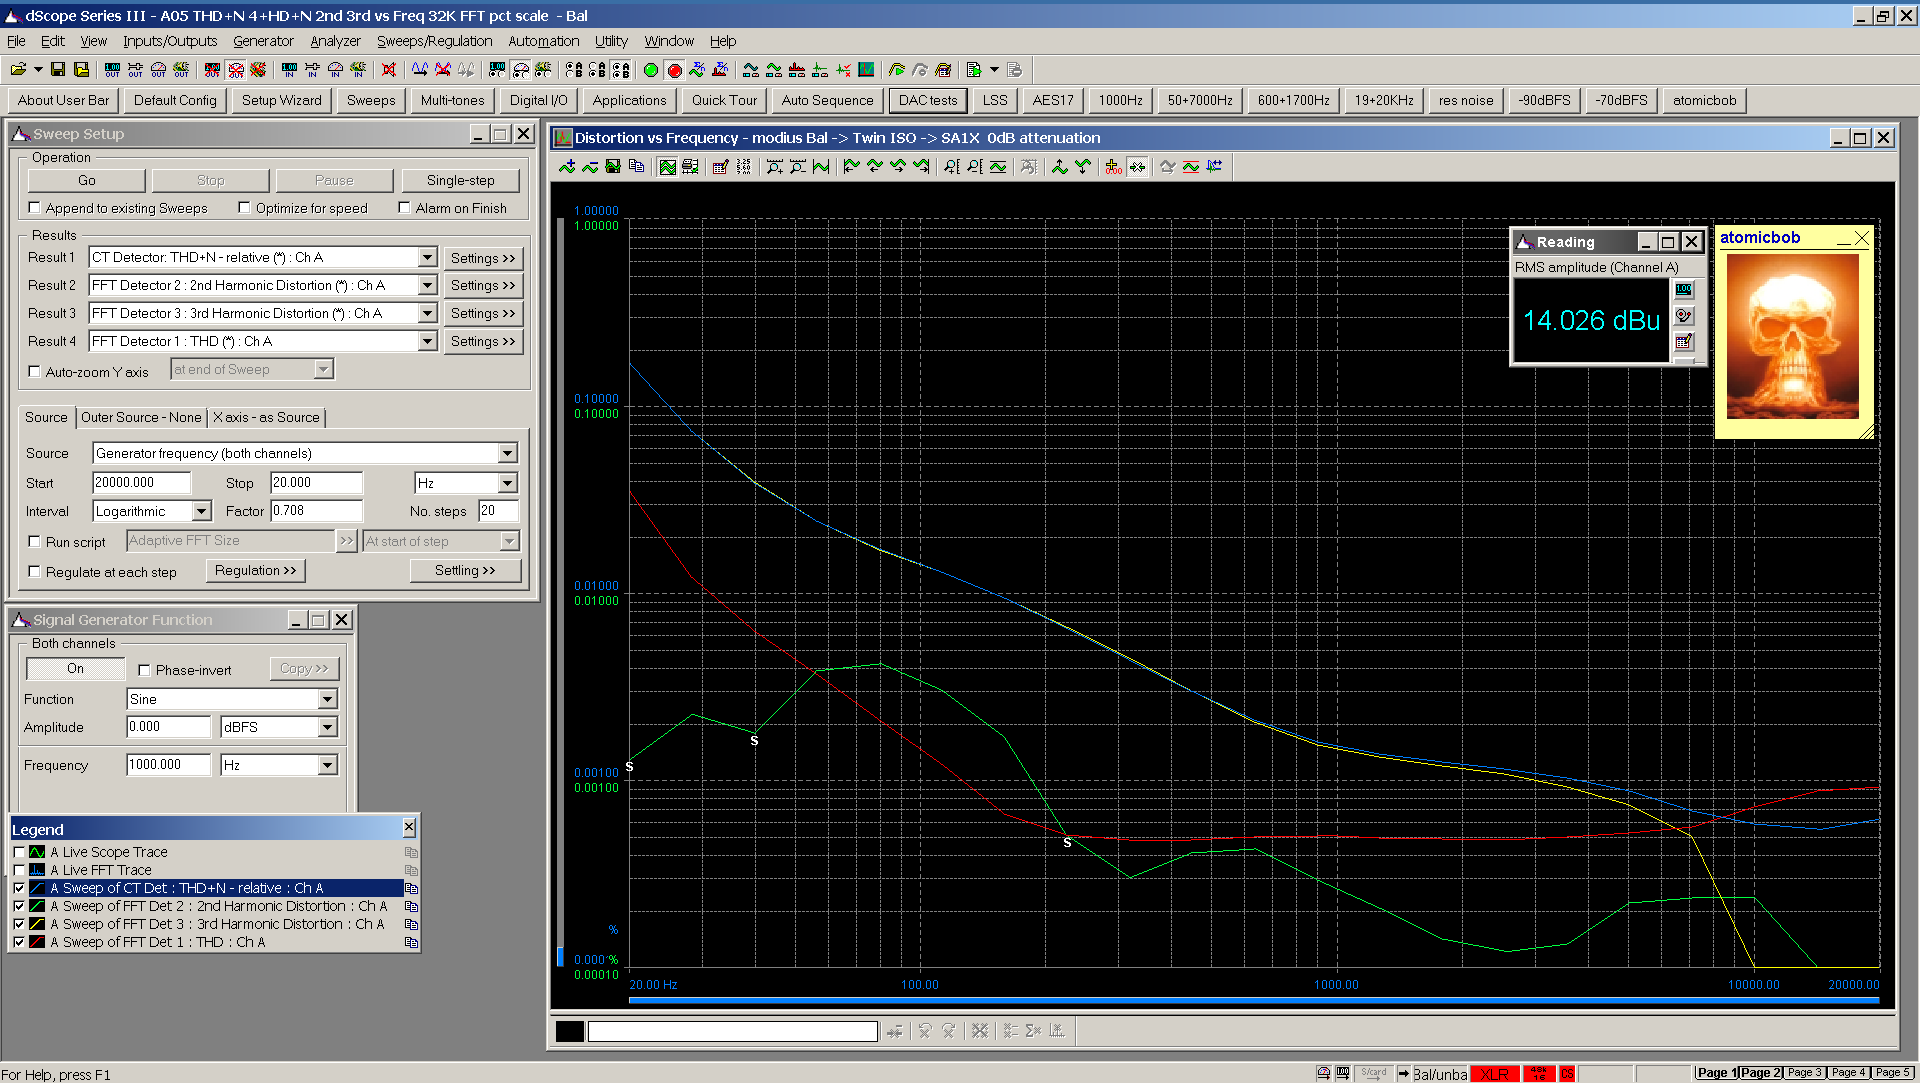 20210206 modius to Twin ISO to SA1X 0 dB attenuation Distortion vs Frequency pct scale.png